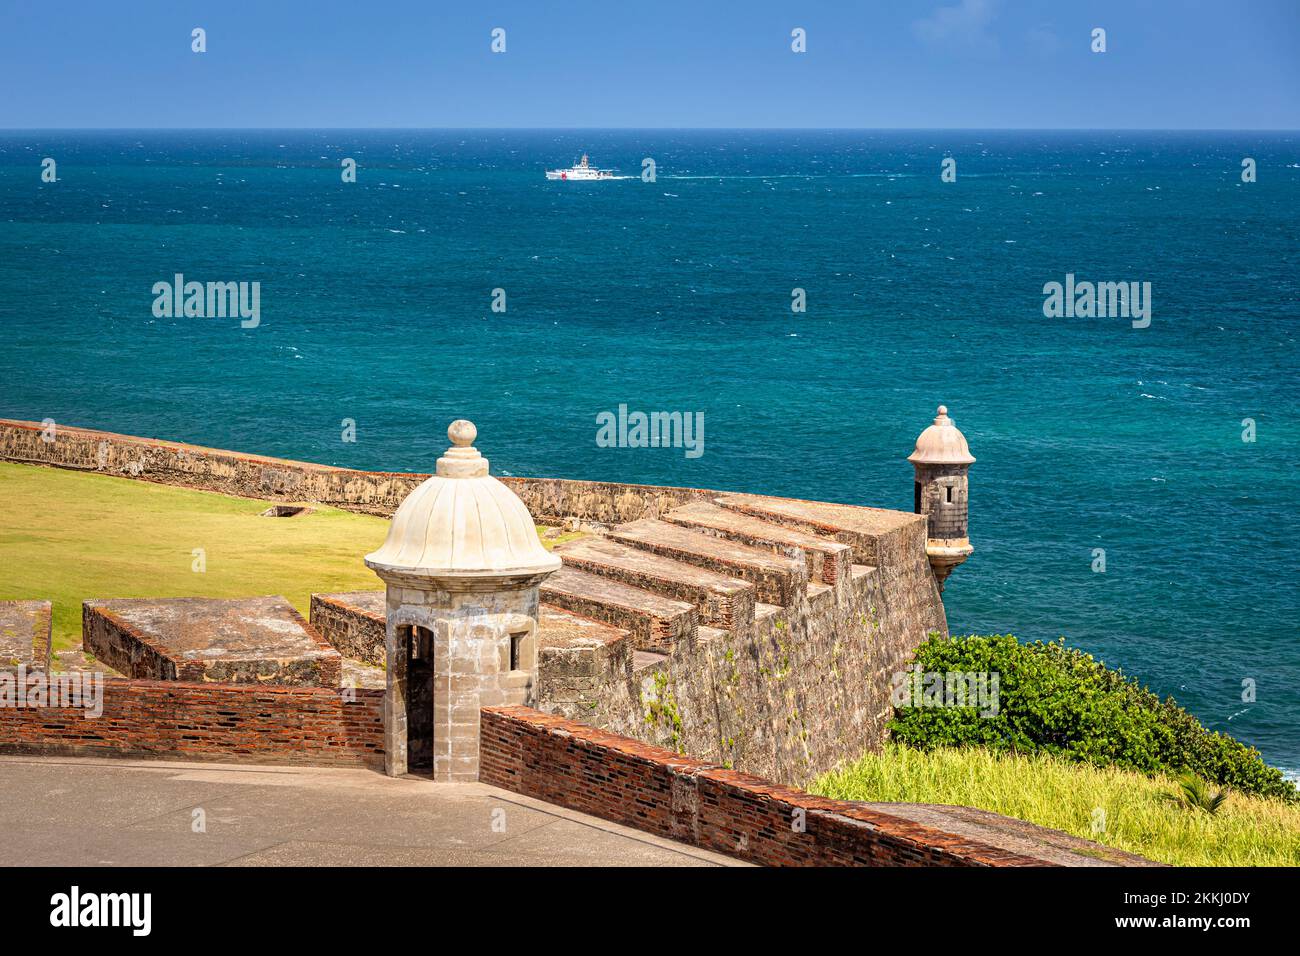 Sentry boxes at the San Cristobal Castle in Old San Juan, on the tropical Caribbean island of Puerto Rico, USA. Stock Photo